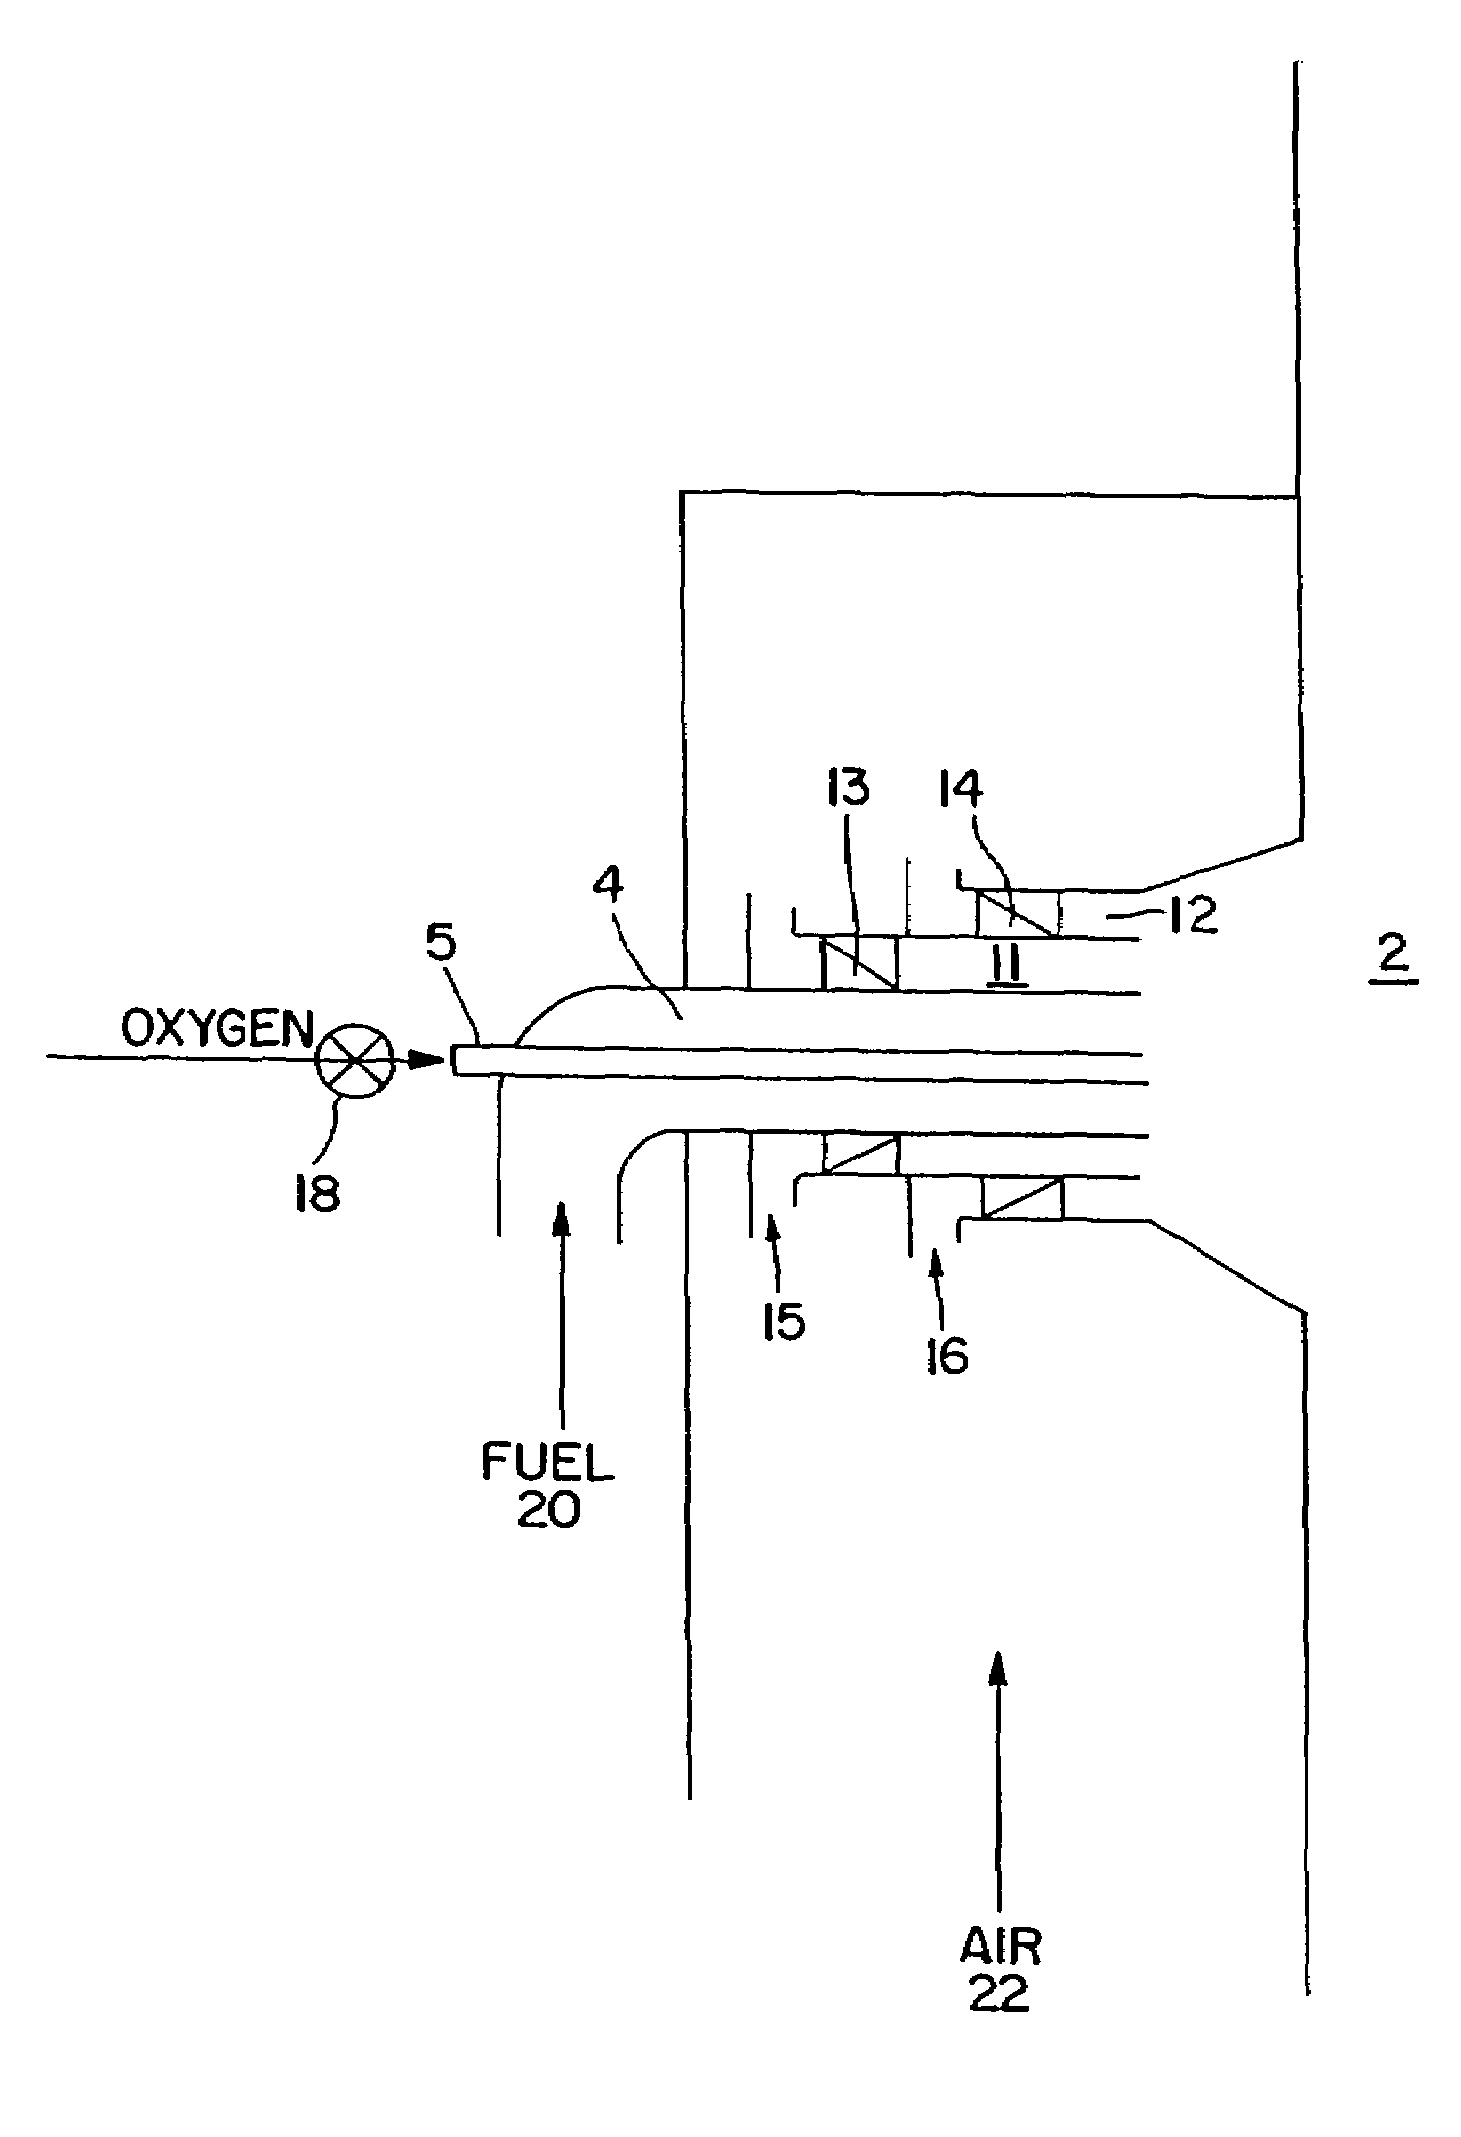 Method of operating furnace to reduce emissions